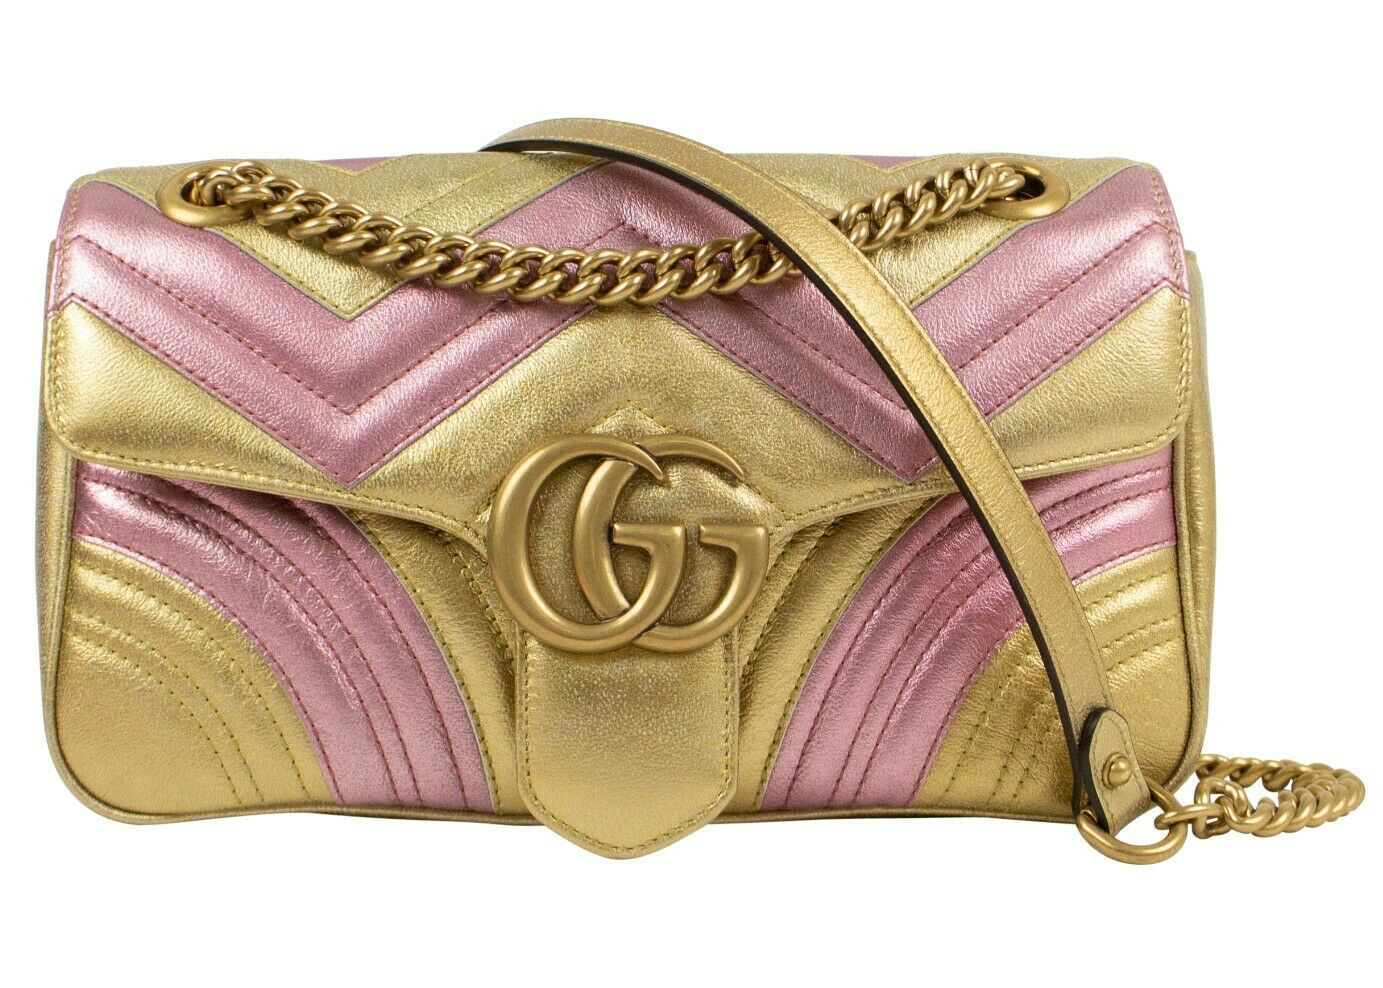 gucci marmont hot pink